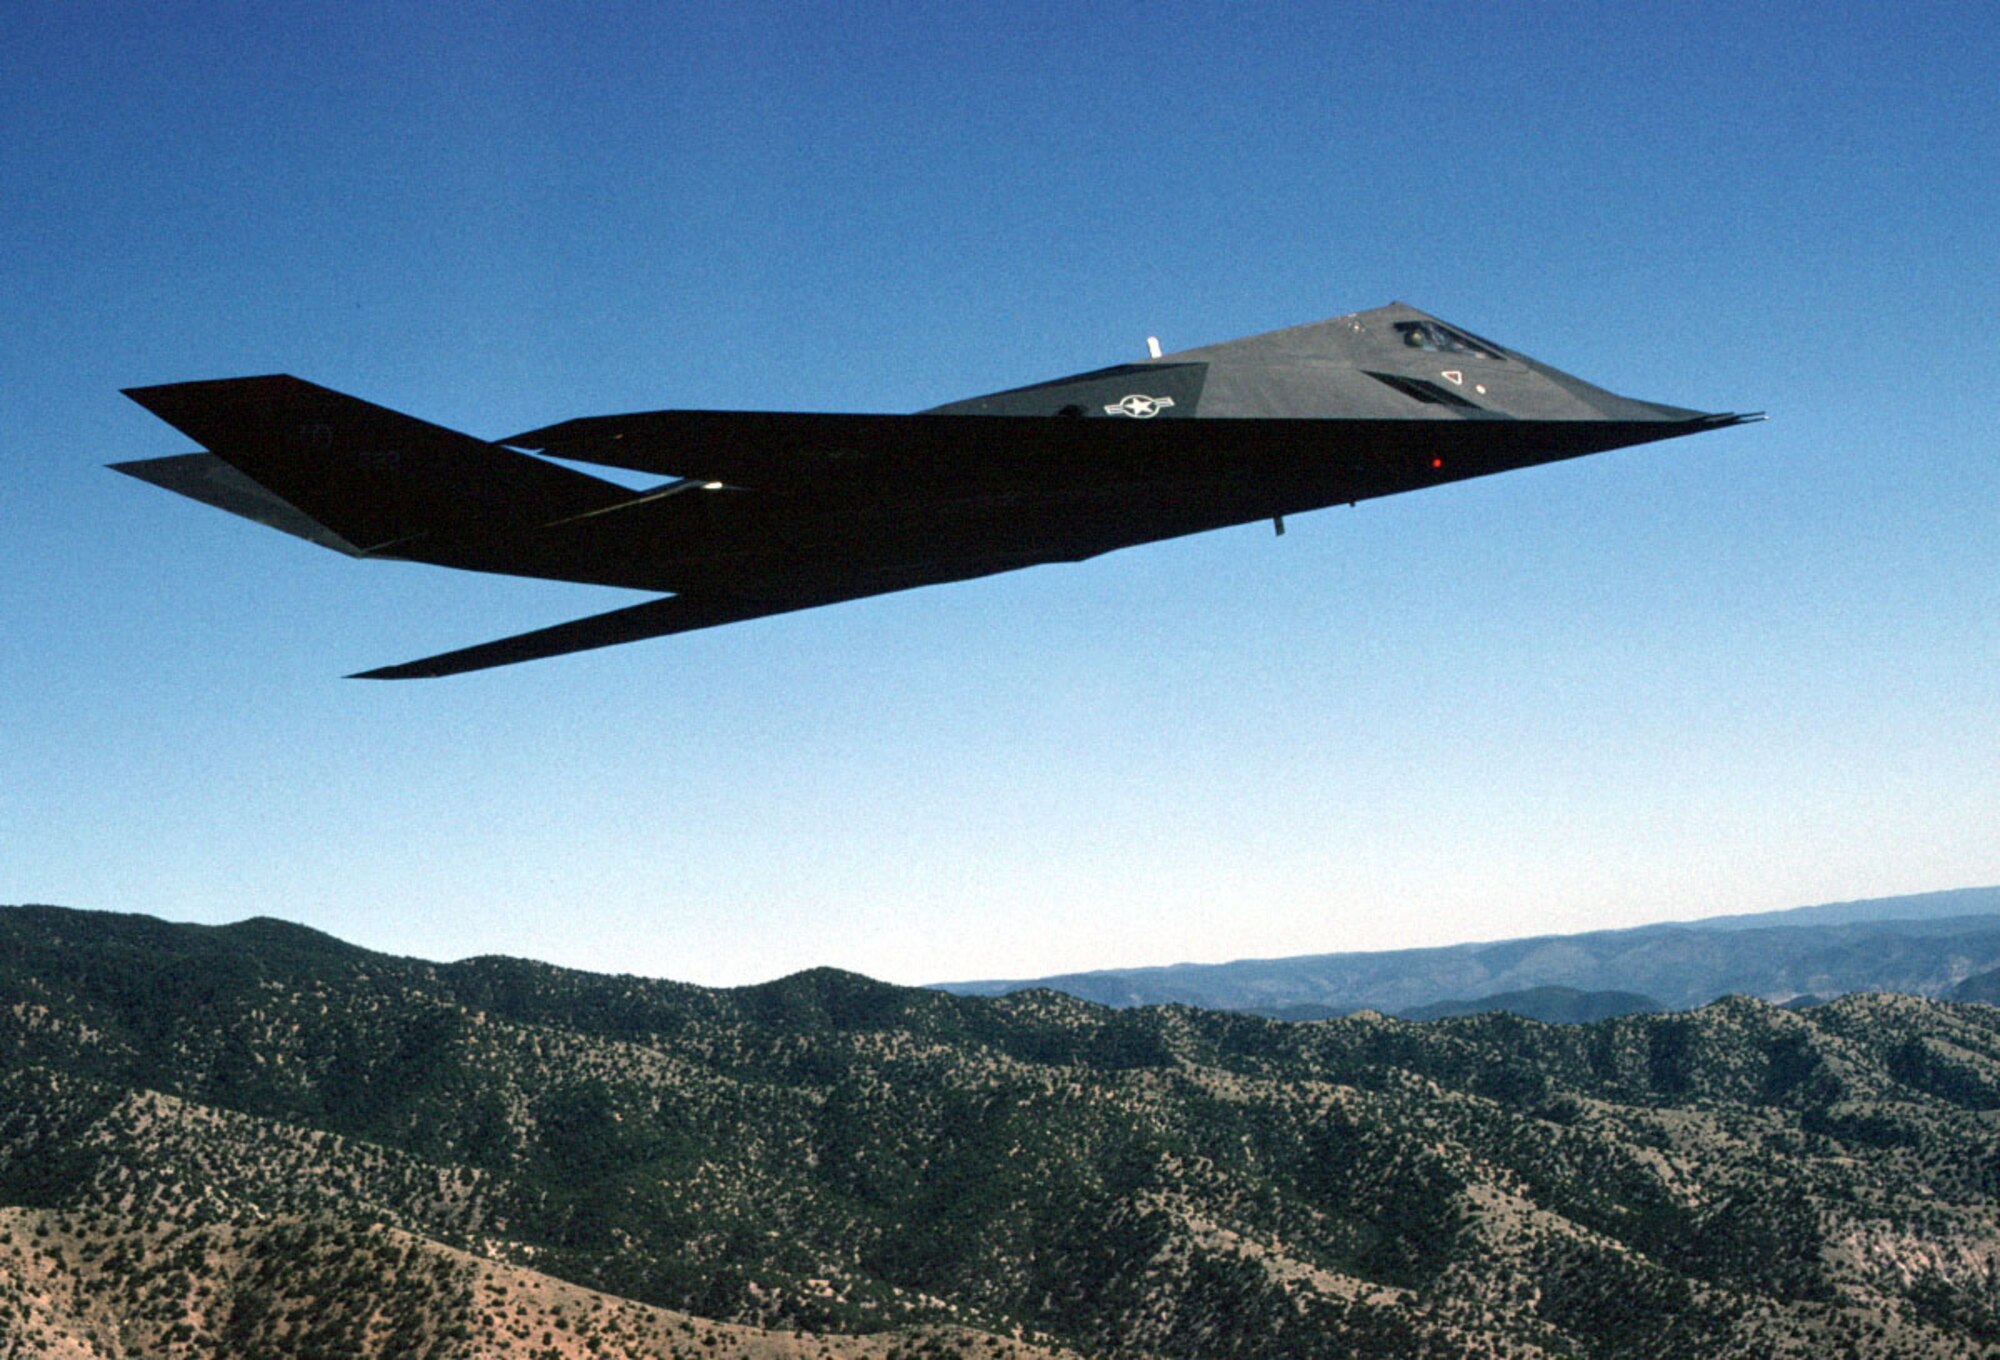 NEW MEXICO -- The F-117A Nighthawk Stealth fighter from the 49th Fighter Wing, 9th Fighter Squadron "Iron Knights," from Holloman Air Force Base, N.M. Flies a training mission over the New Mexico desert. The F-117 is the world's first operational aircraft designed to exploit low-observable stealth technology. The unique design of the single-seat F-117A provides exceptional combat capabilities. Air refuelable, it supports worldwide commitments and adds to the deterrent strength of the U.S. military forces. The F-117A can employ a variety of weapons and is equipped with sophisticated navigation and attack systems integrated into a state-of-the-art digital avionics suite that increases mission effectiveness and reduces pilot workload.  (U.S. Air Force Photo by Staff Sgt. Andy Dunaway)